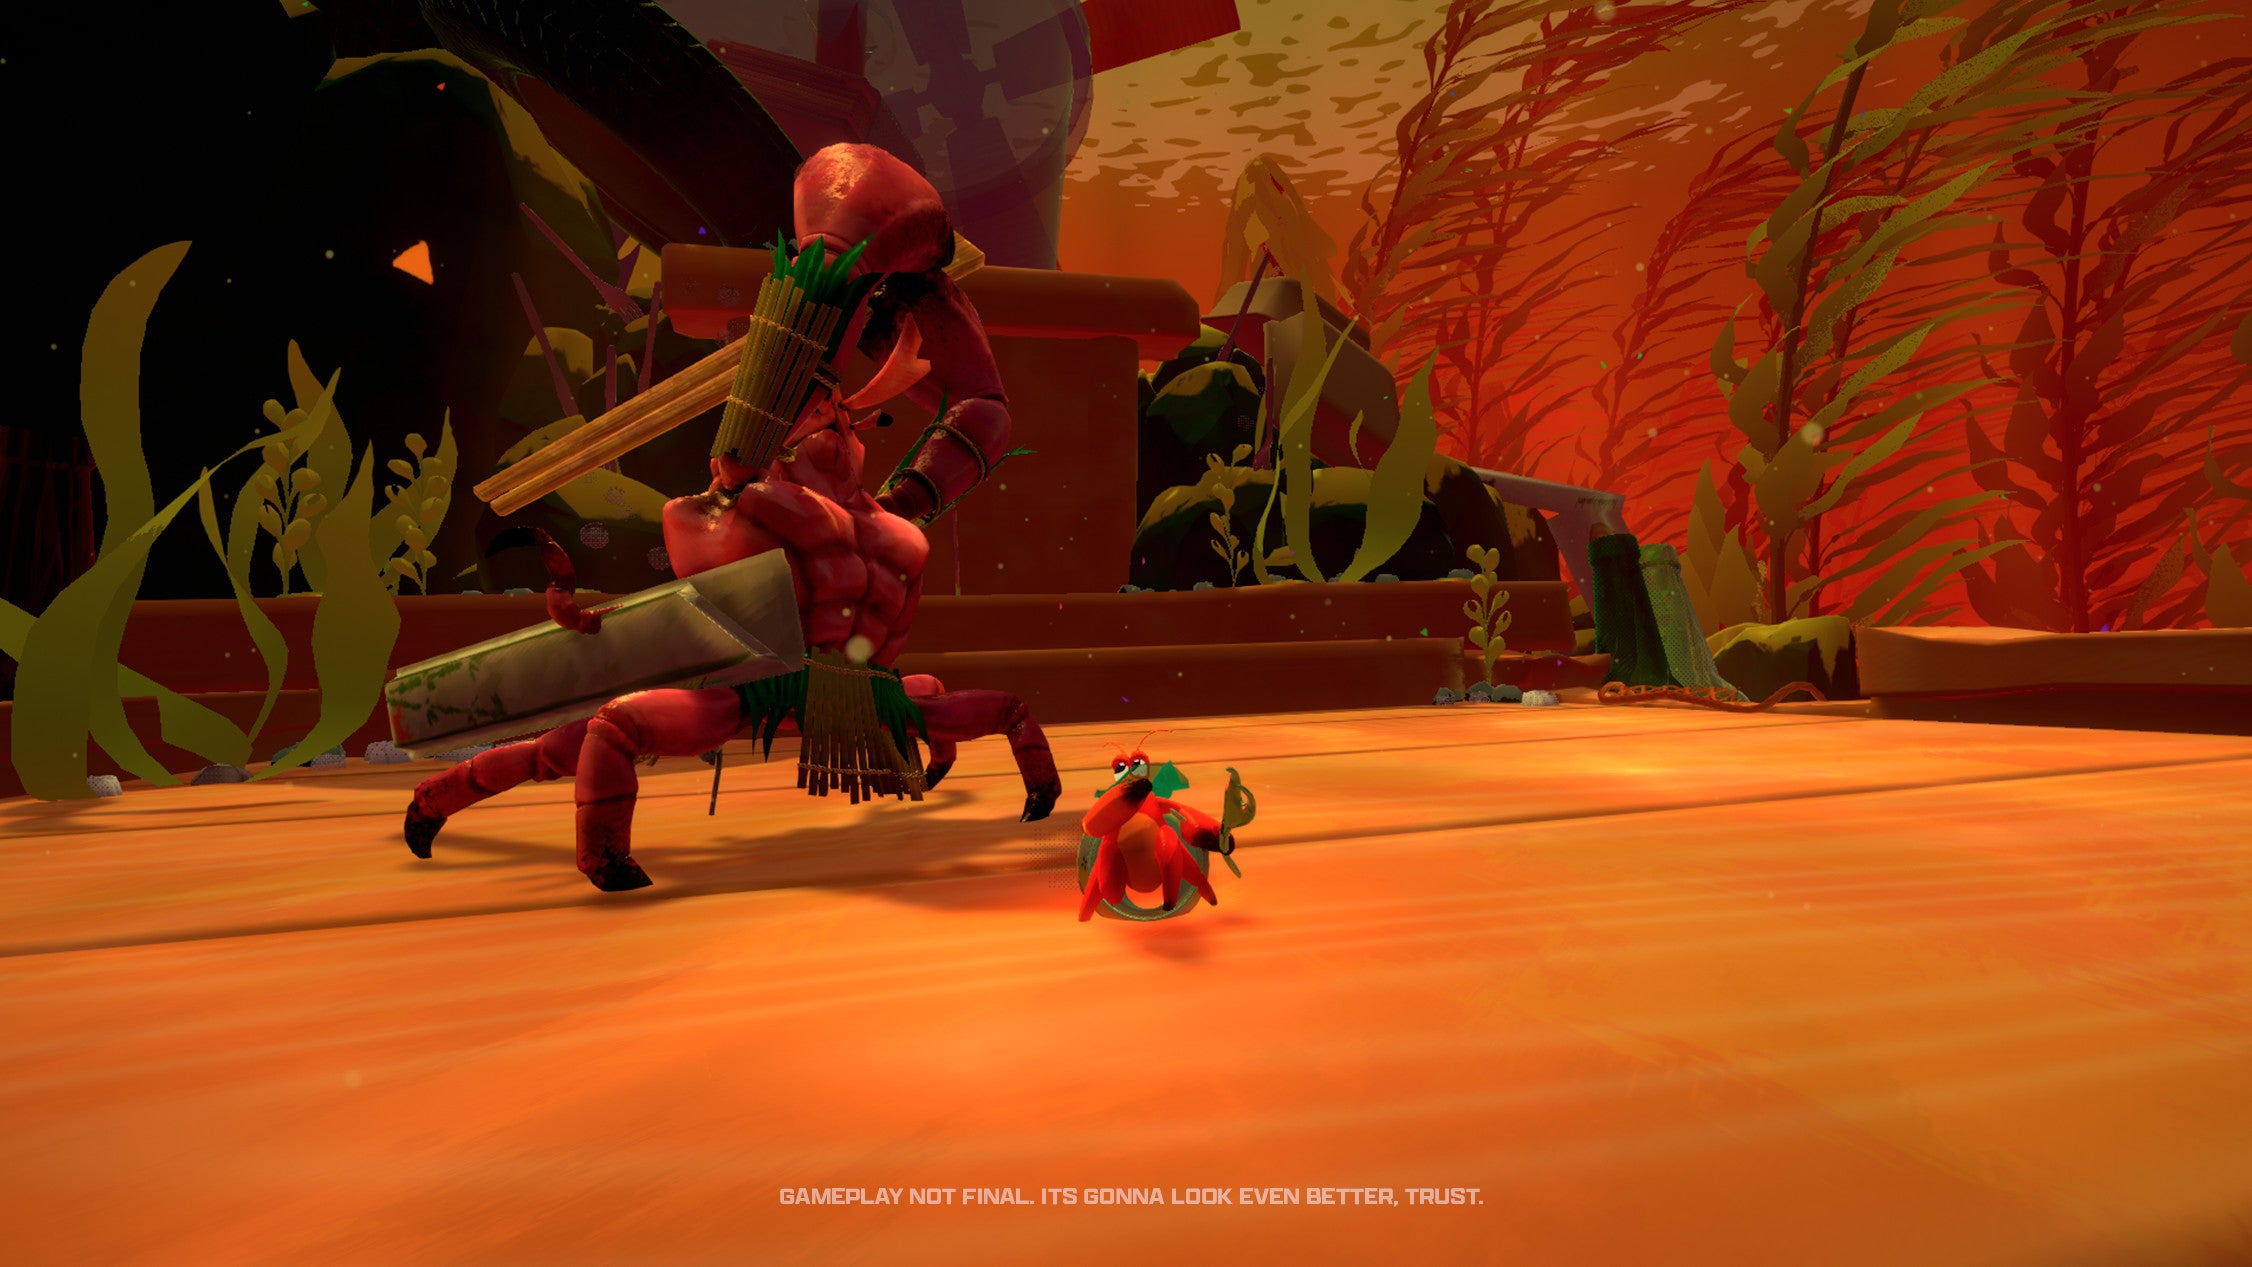 A screenshot of Another Crab's Treasure, showing a colourful hermit crab about to be attacked by a much bigger... lobster?